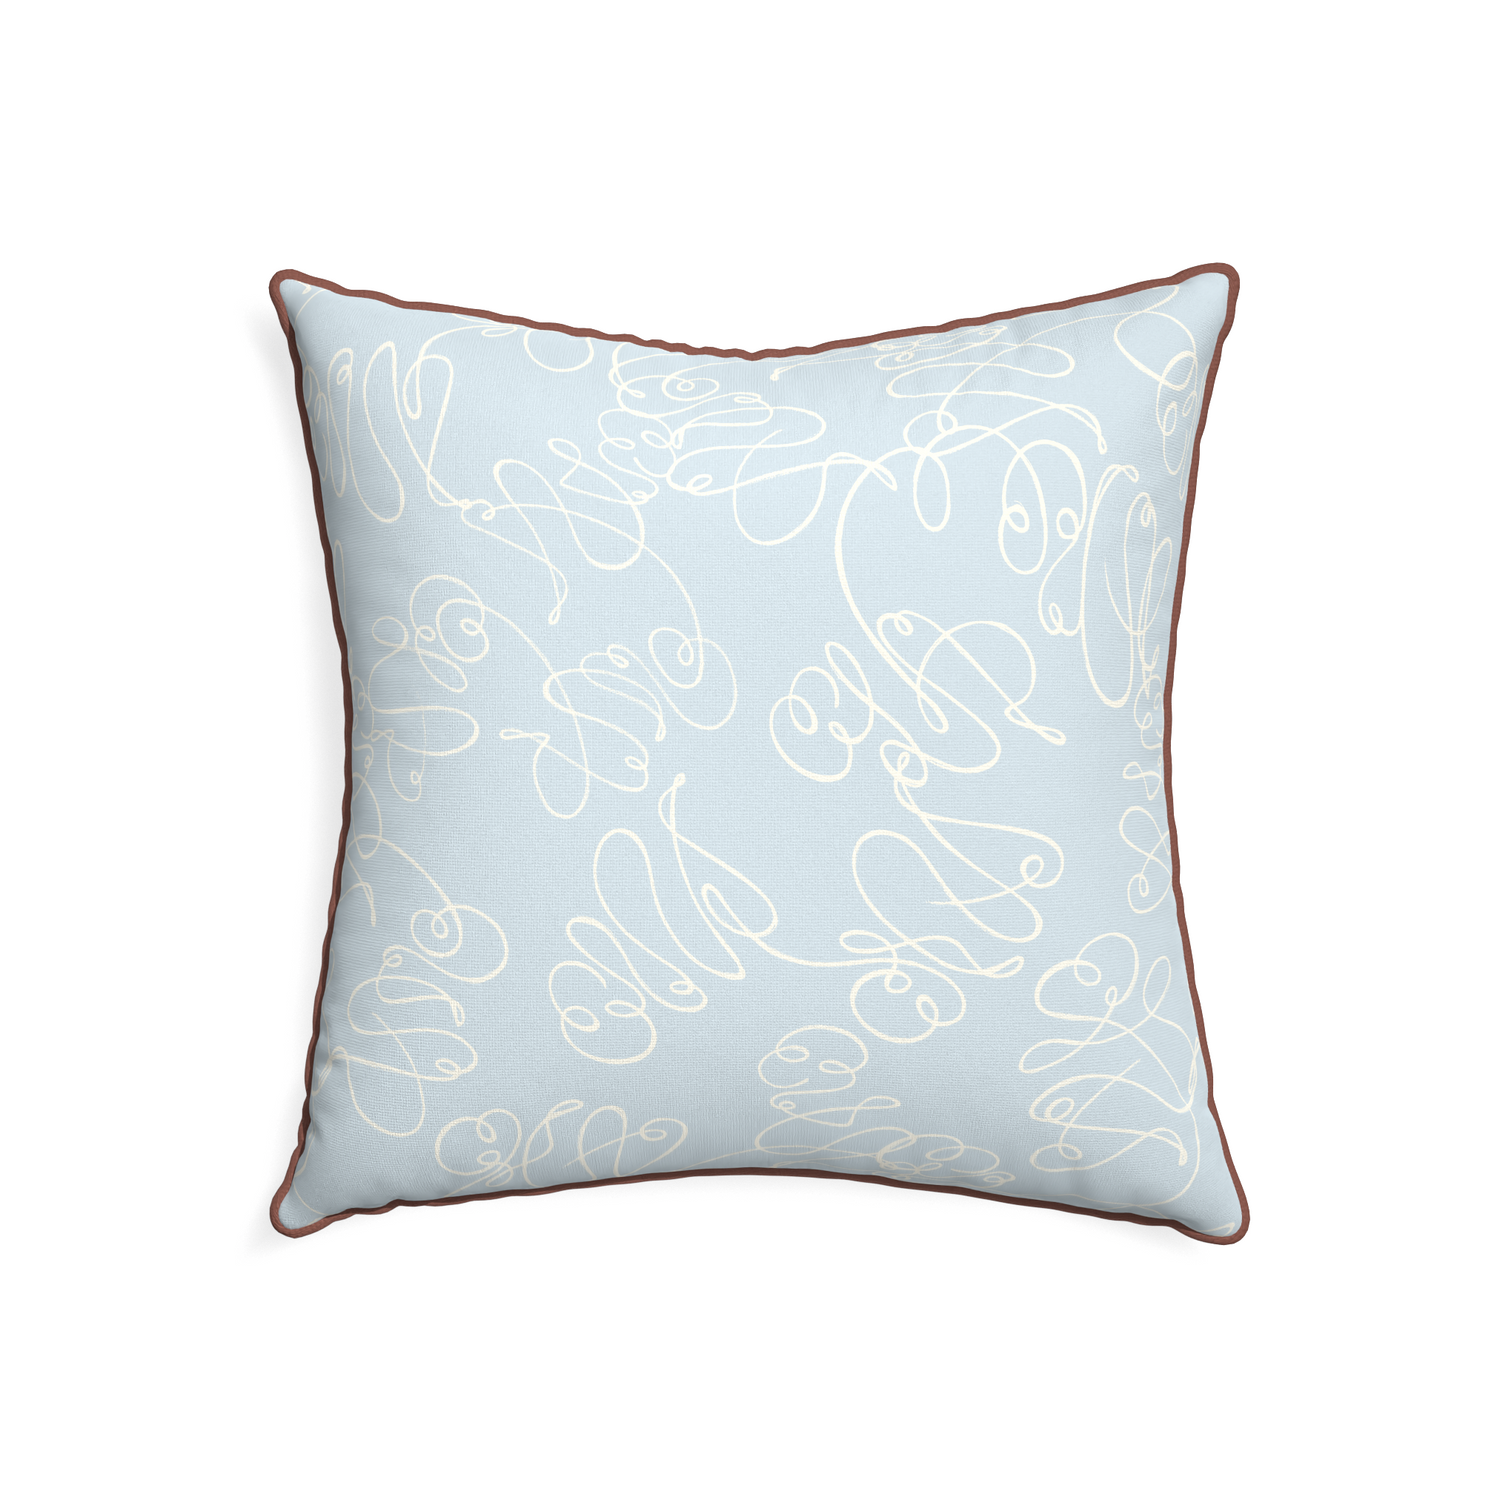 22-square mirabella custom powder blue abstractpillow with w piping on white background